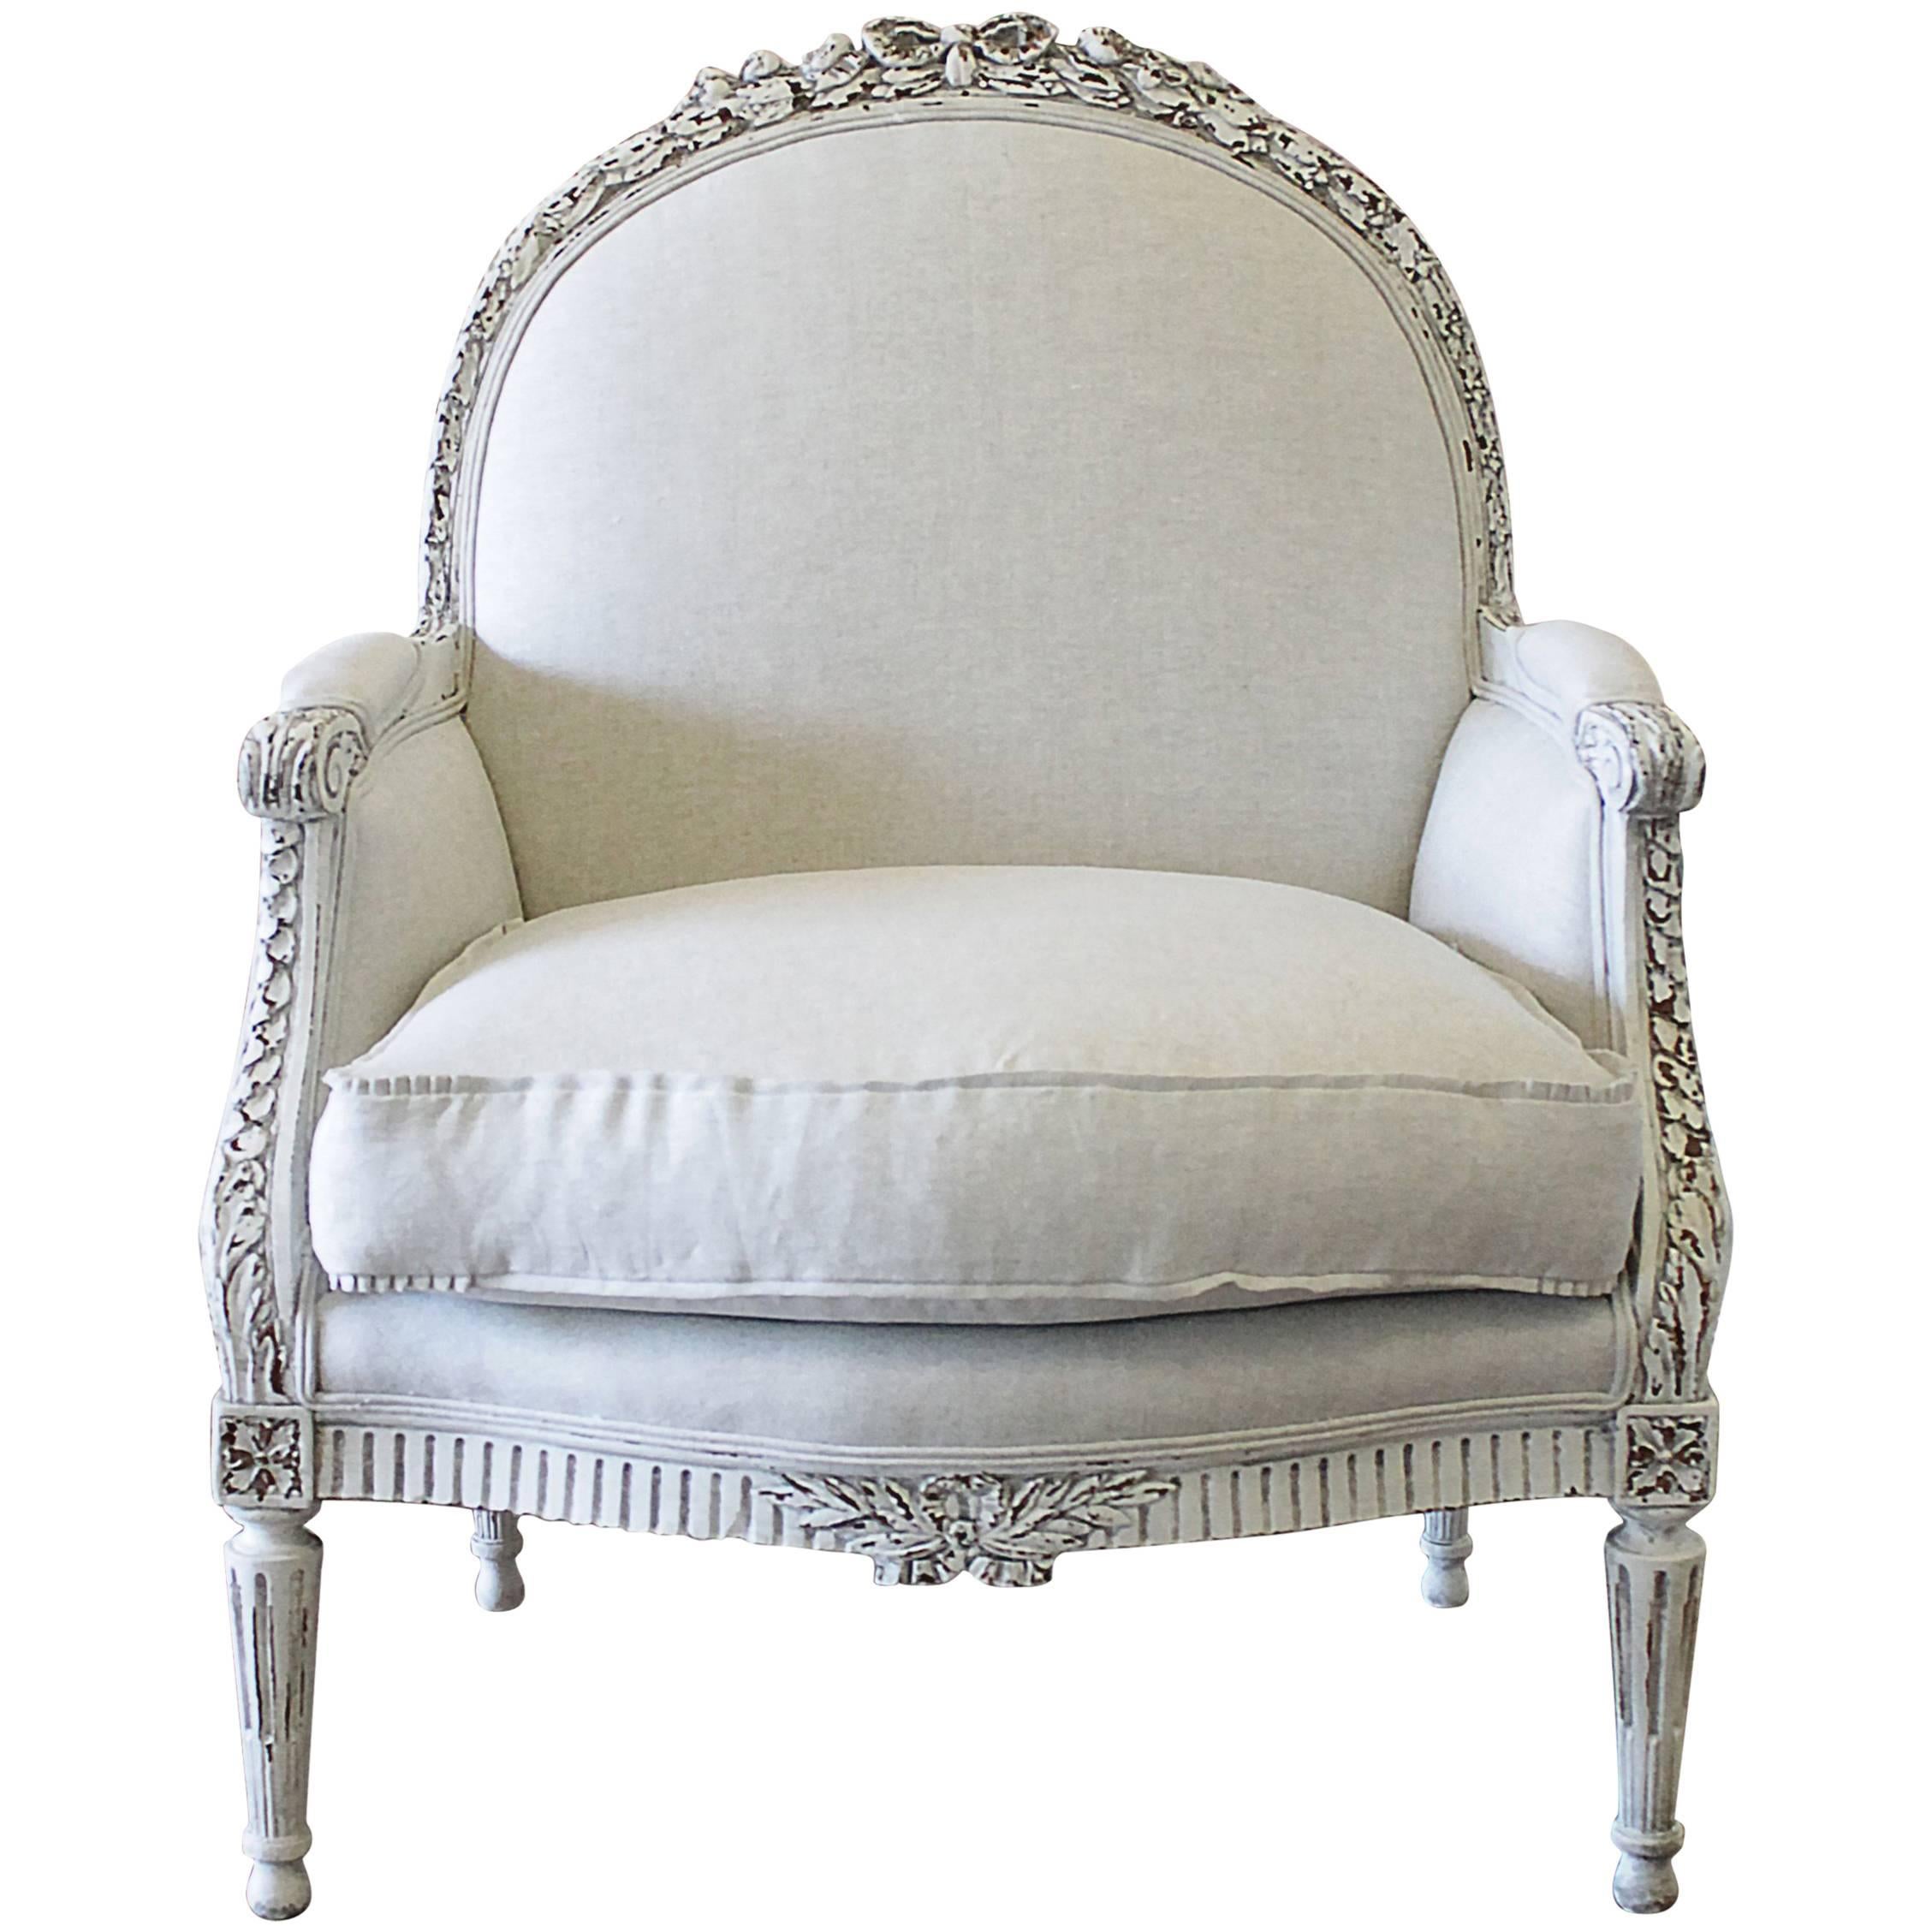 Early 20th Century Carved and Painted Louis XVI Style Bergere Chair